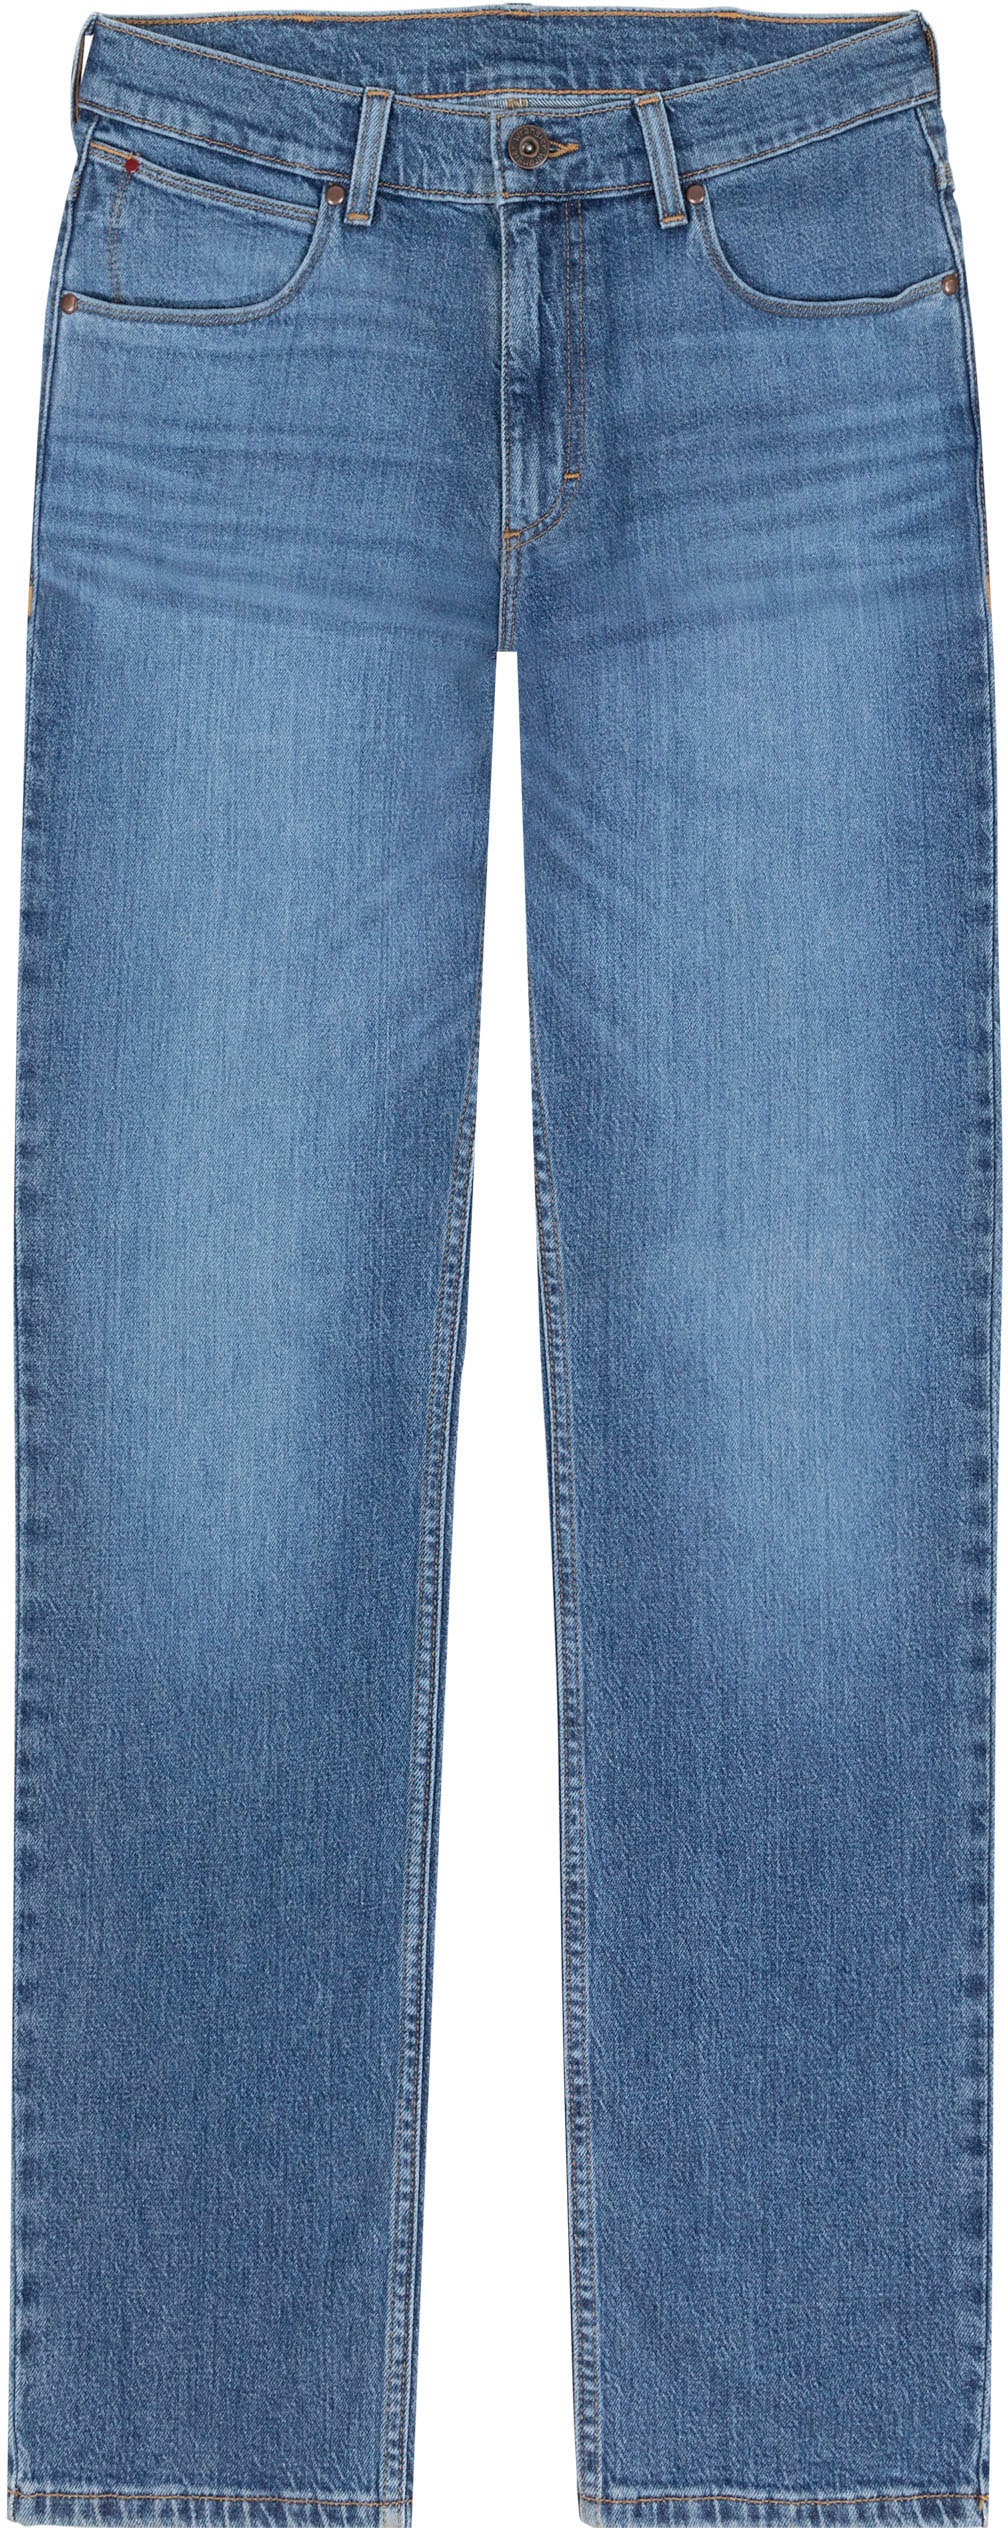 kaufen Wrangler bequem »Authentic Straight« Straight-Jeans